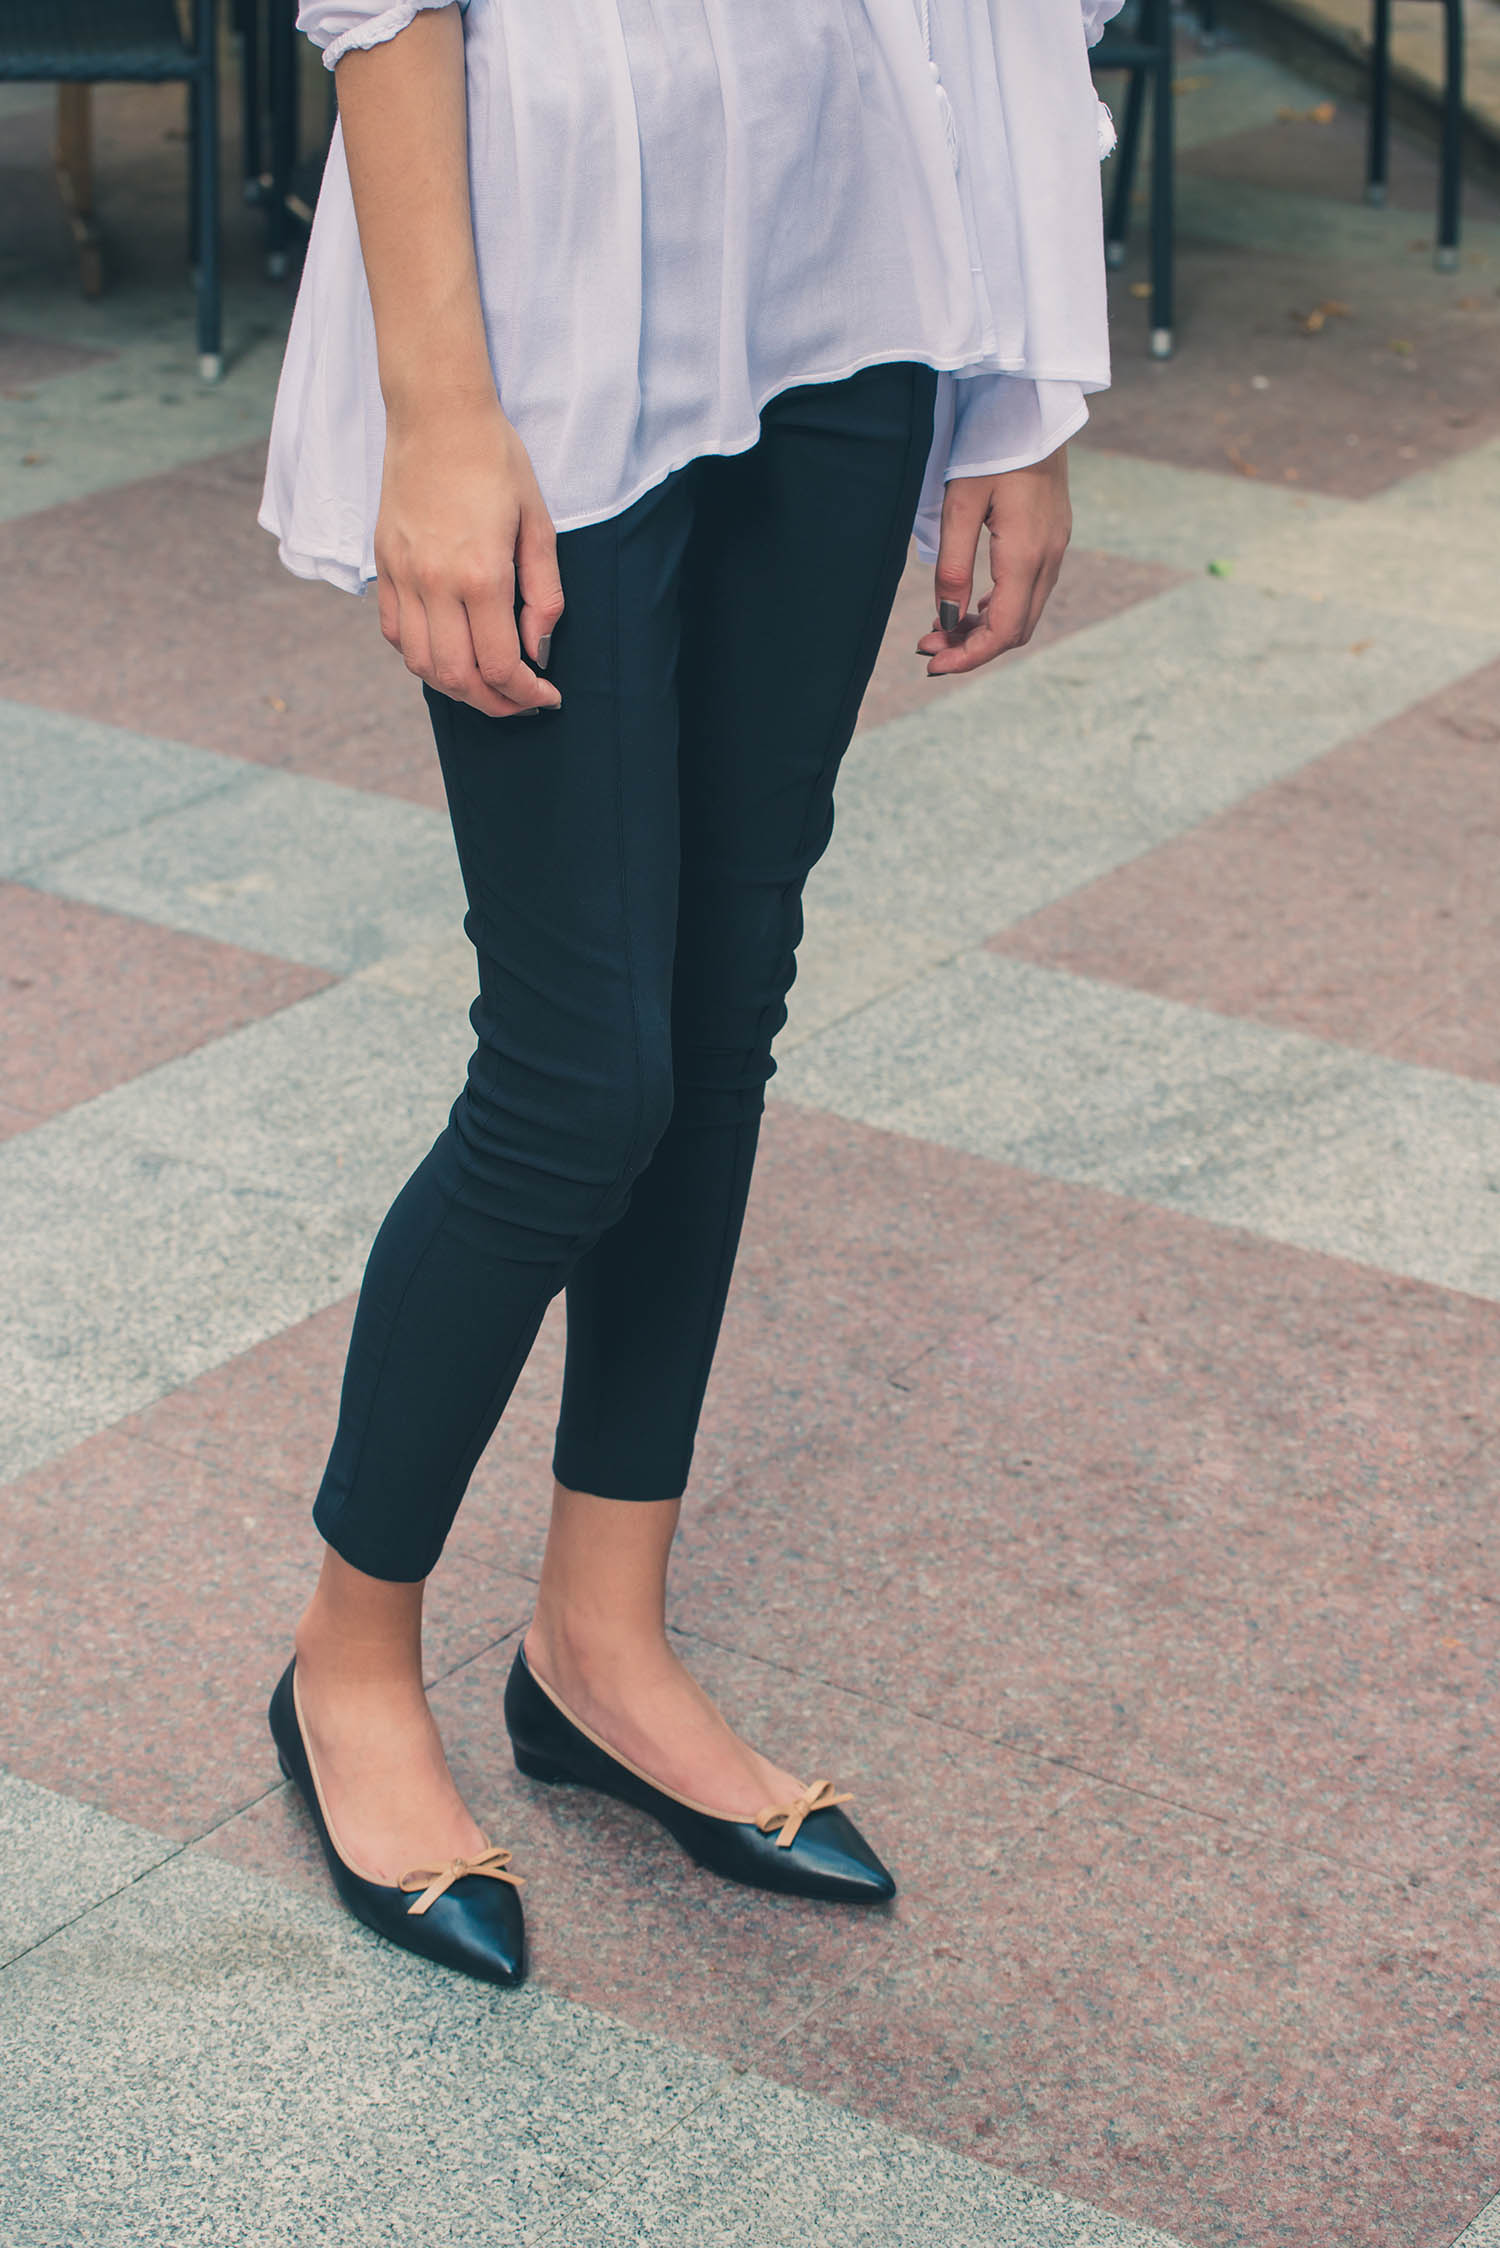 Ballet Flats in Black Leather 